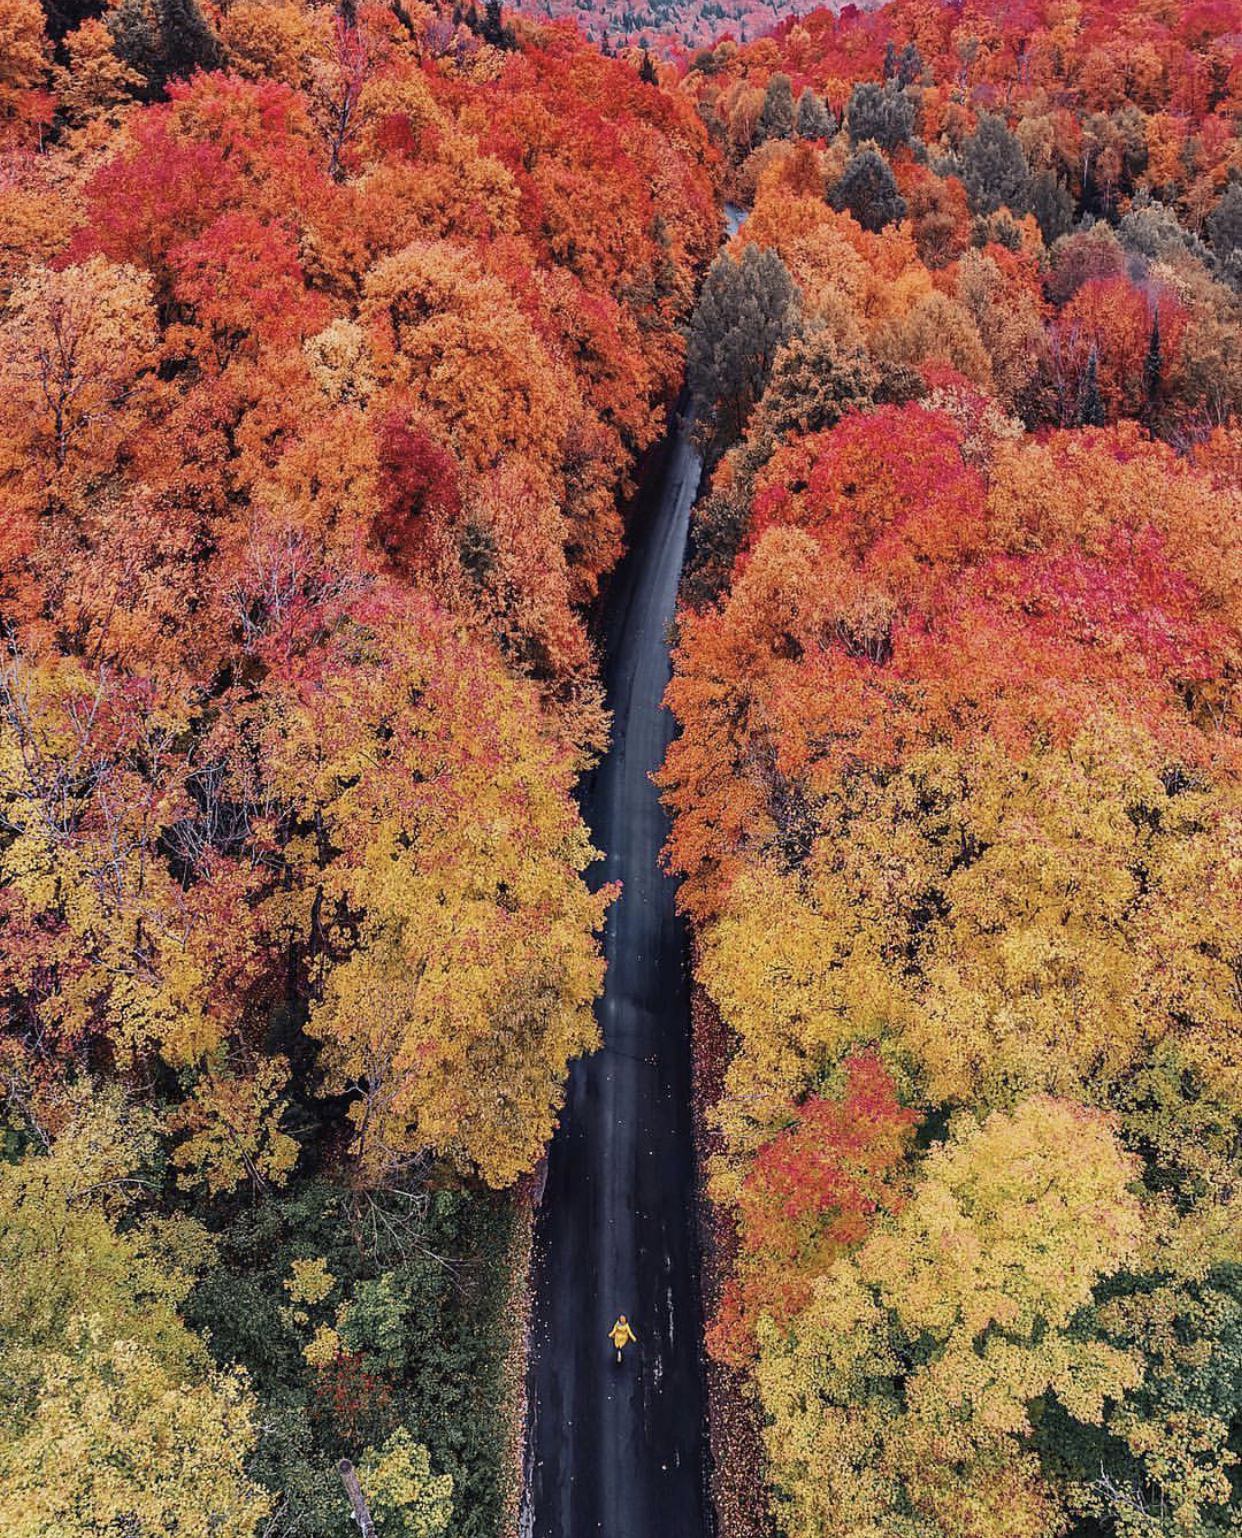 The photos of Kristina Makeeva, a photographer based in Russia, are like magic. He often gives surreal effects to the images using Photoshop. In addition to placing a person in a yellow raincoat in the middle of a road surrounded by trees full of autumn leaves to draw the viewer's attention, what makes this photo stand out is the unique composition he created using the Phantom 4's automatic settings and Minimal manipulation is achieved. This photo was recorded in the Ontario region near Toronto in Canada.